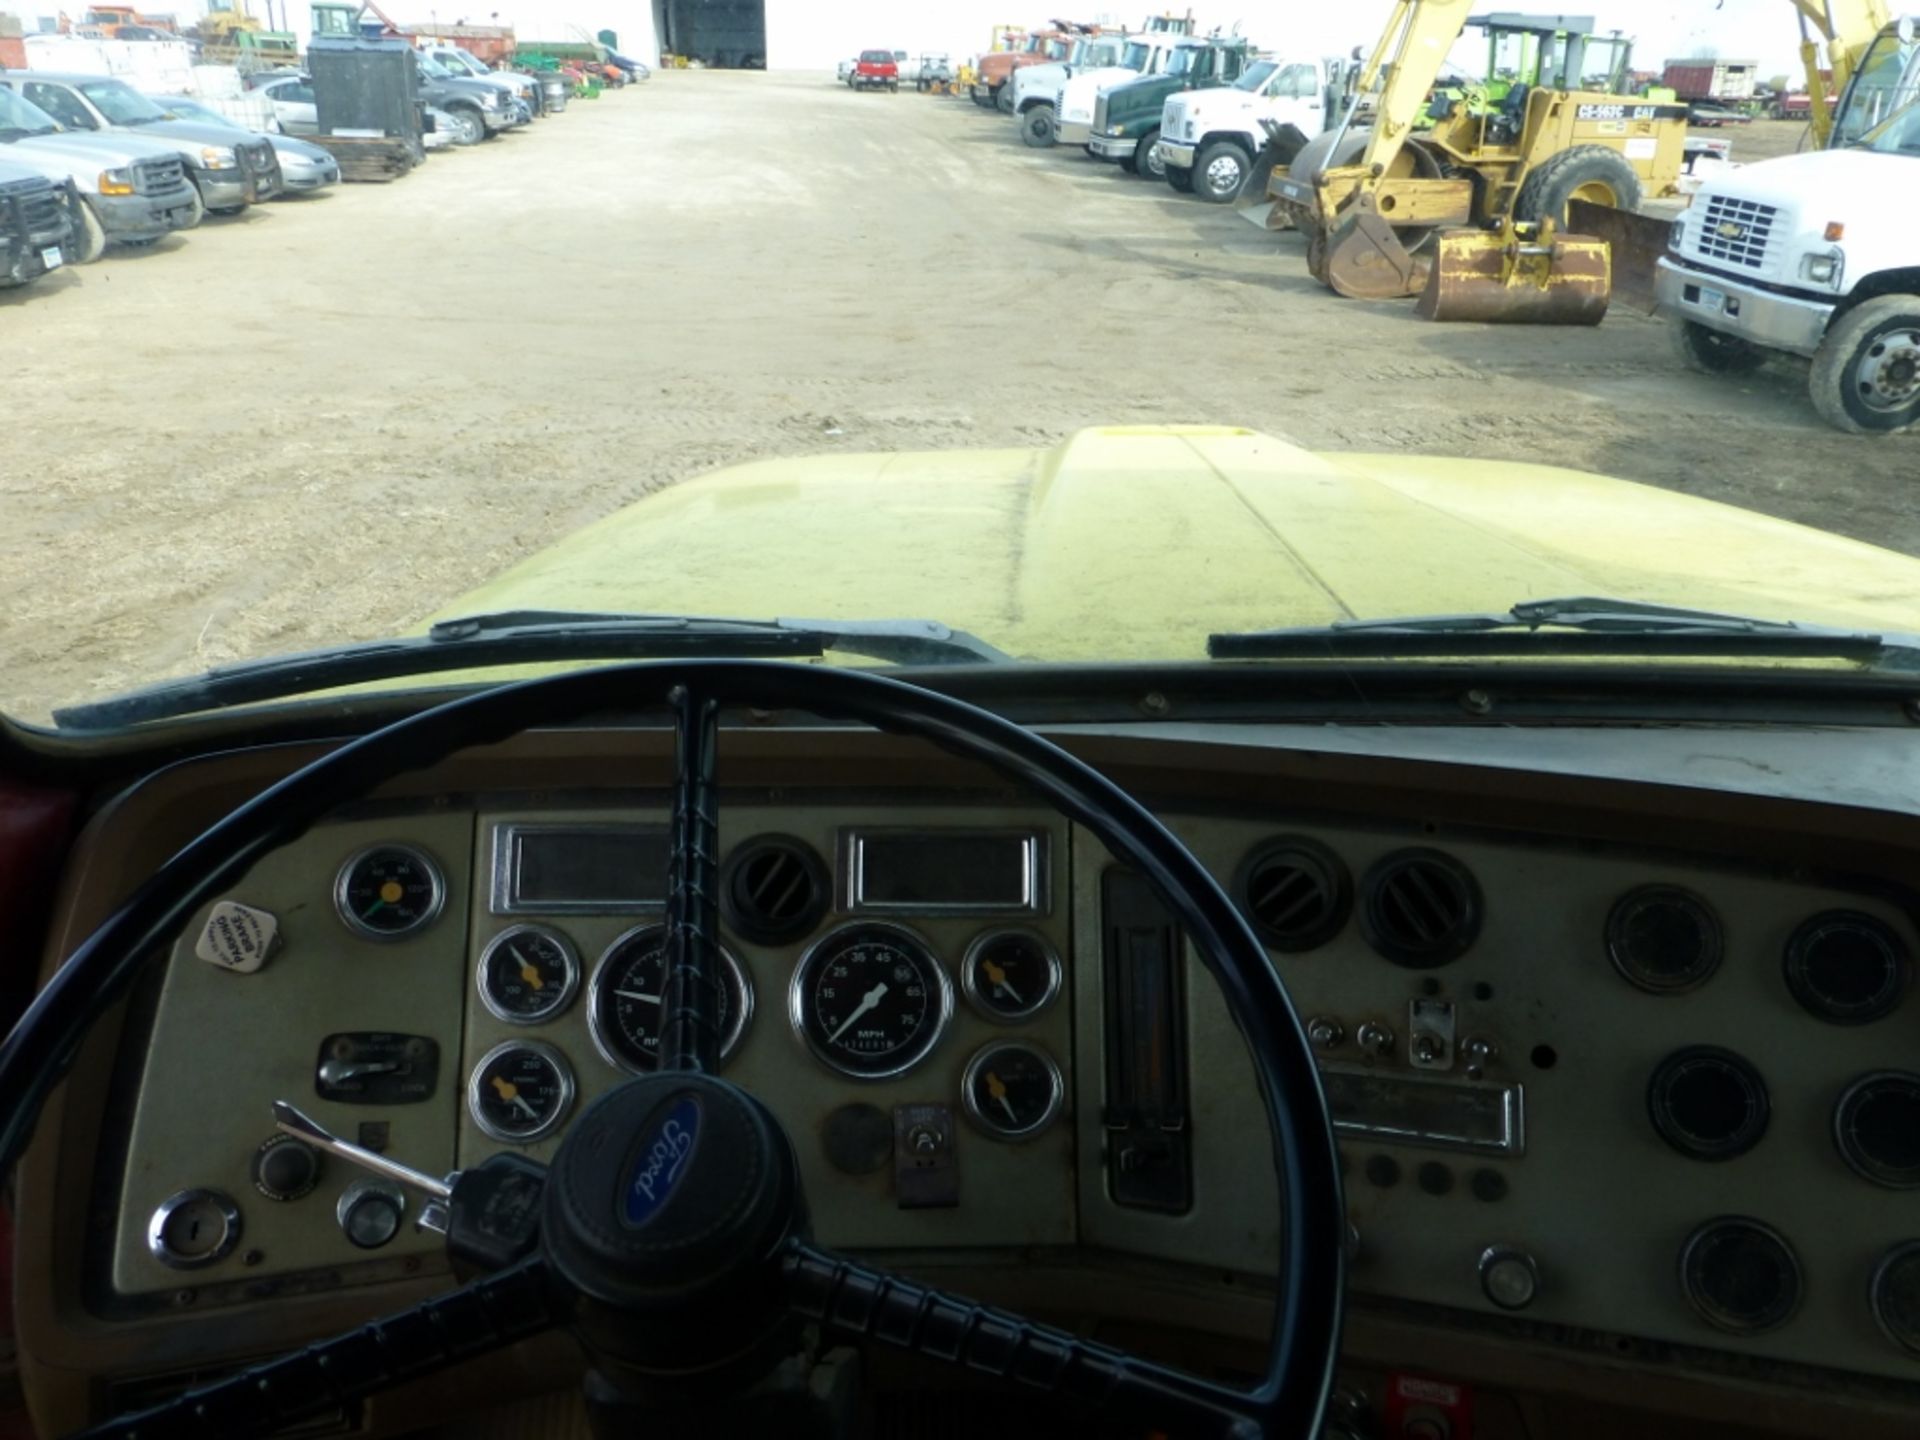 1992 Ford L9000 dump truck - Image 27 of 28